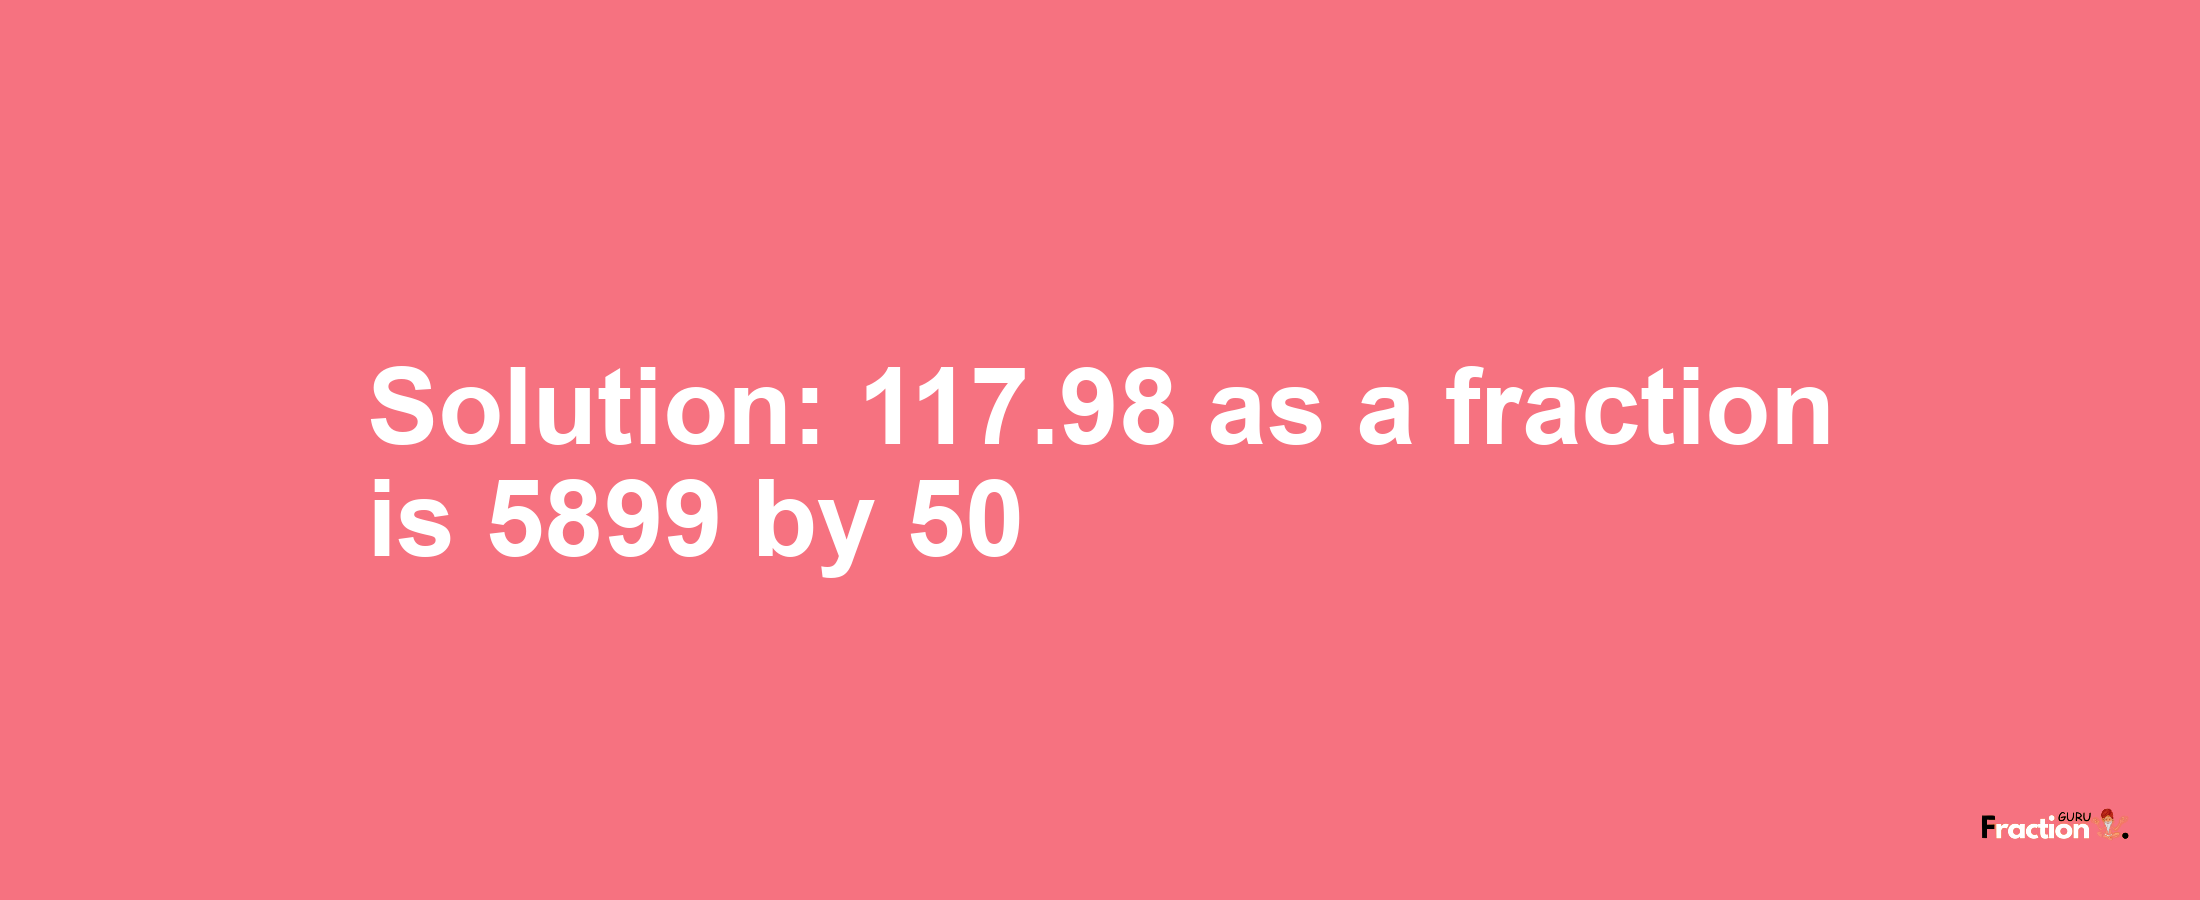 Solution:117.98 as a fraction is 5899/50